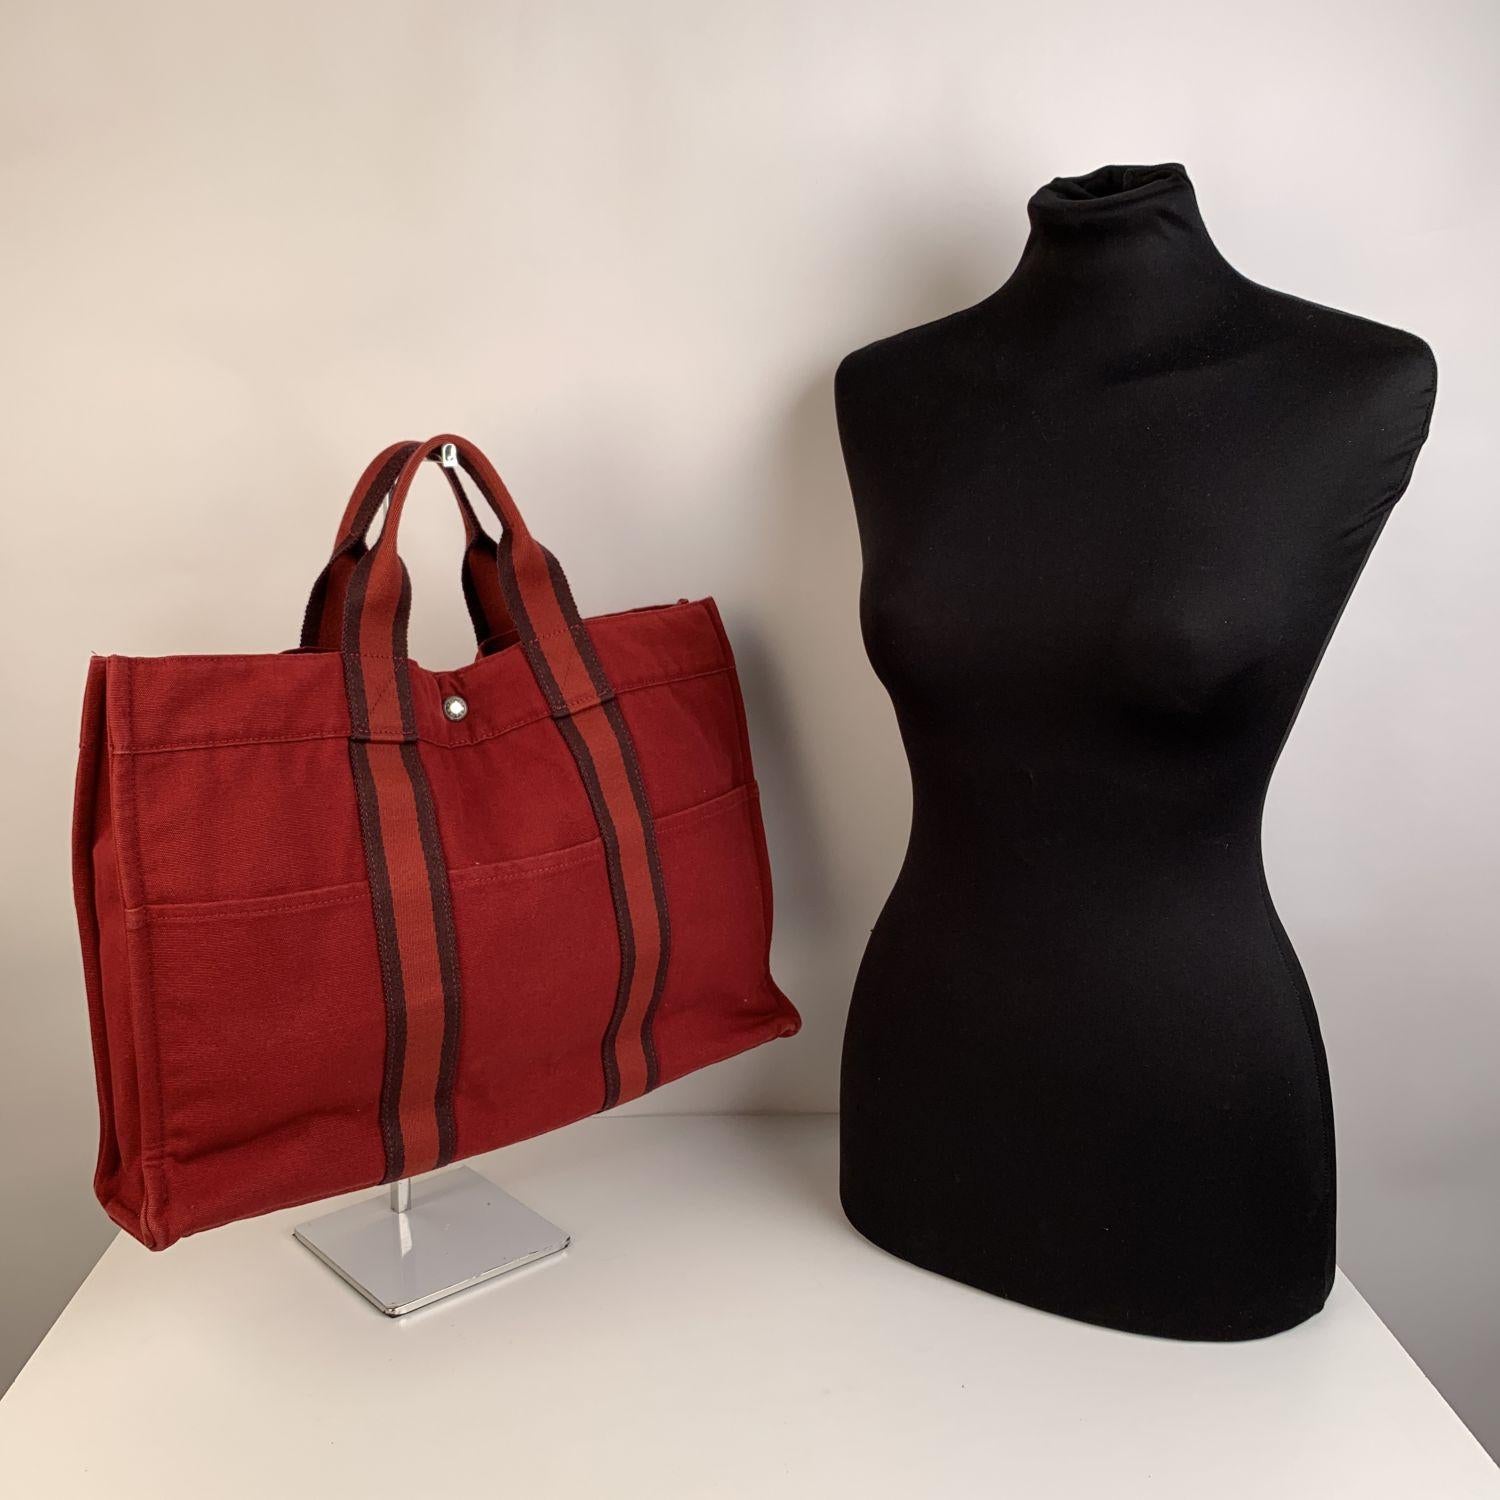 Hermes Paris Vintage red cotton canvas tote, Fourre Tout MM. Made in France. red color with contrast striped detailing. 100% Cotton. 3 front pockets on the front and 3 pockets on the back. It has snaps (buttons) on both ends for expansion. Durable